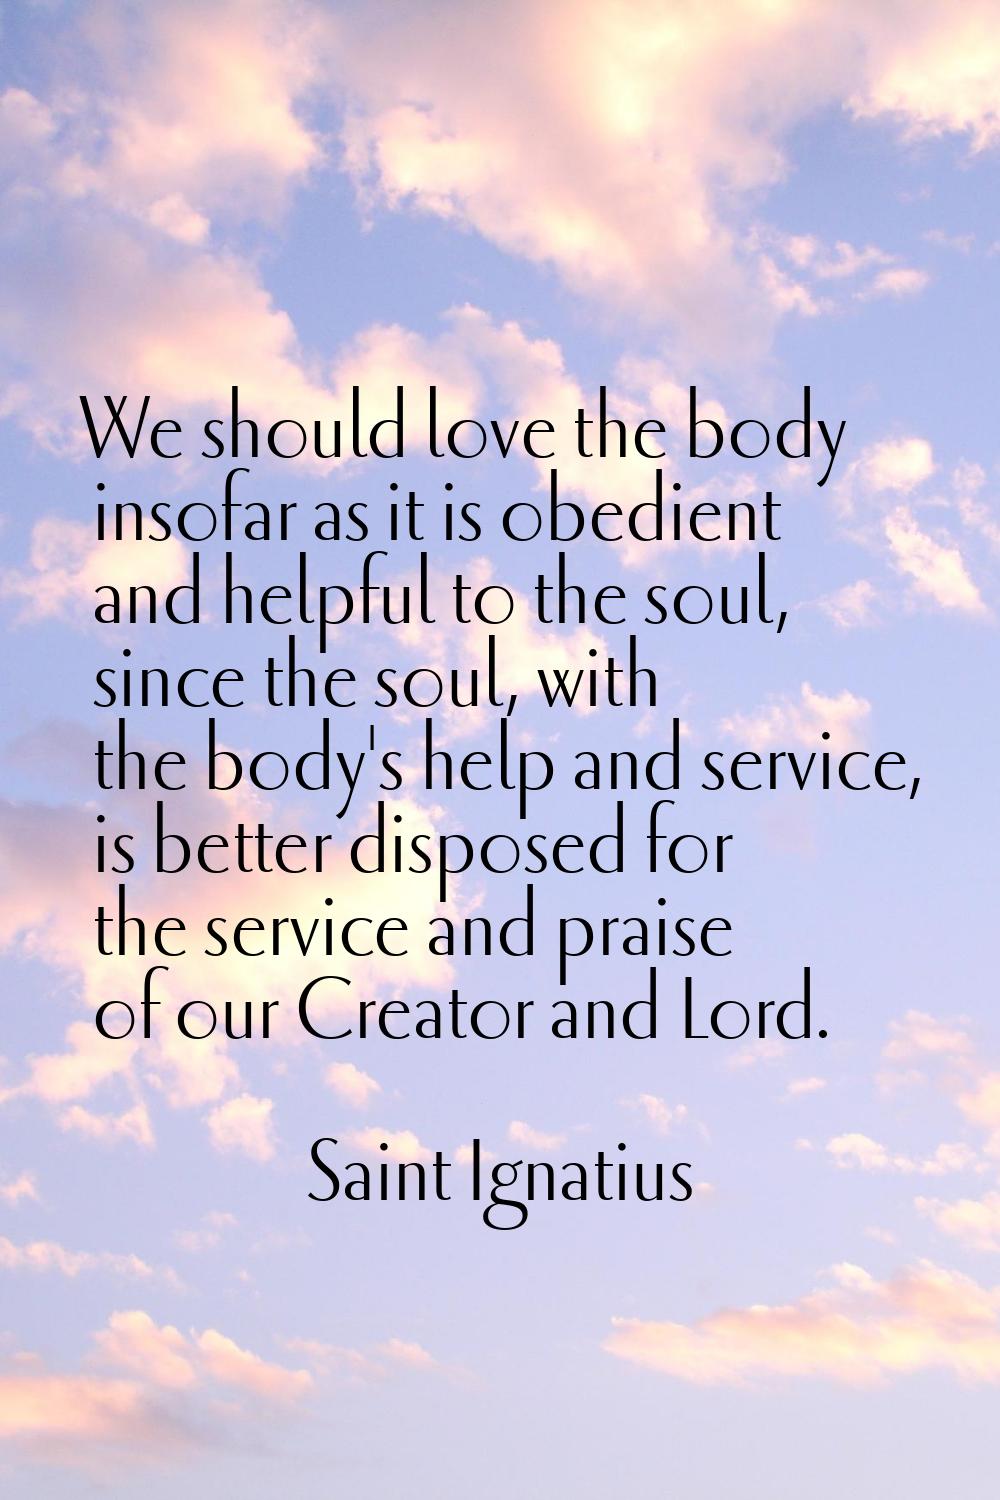 We should love the body insofar as it is obedient and helpful to the soul, since the soul, with the